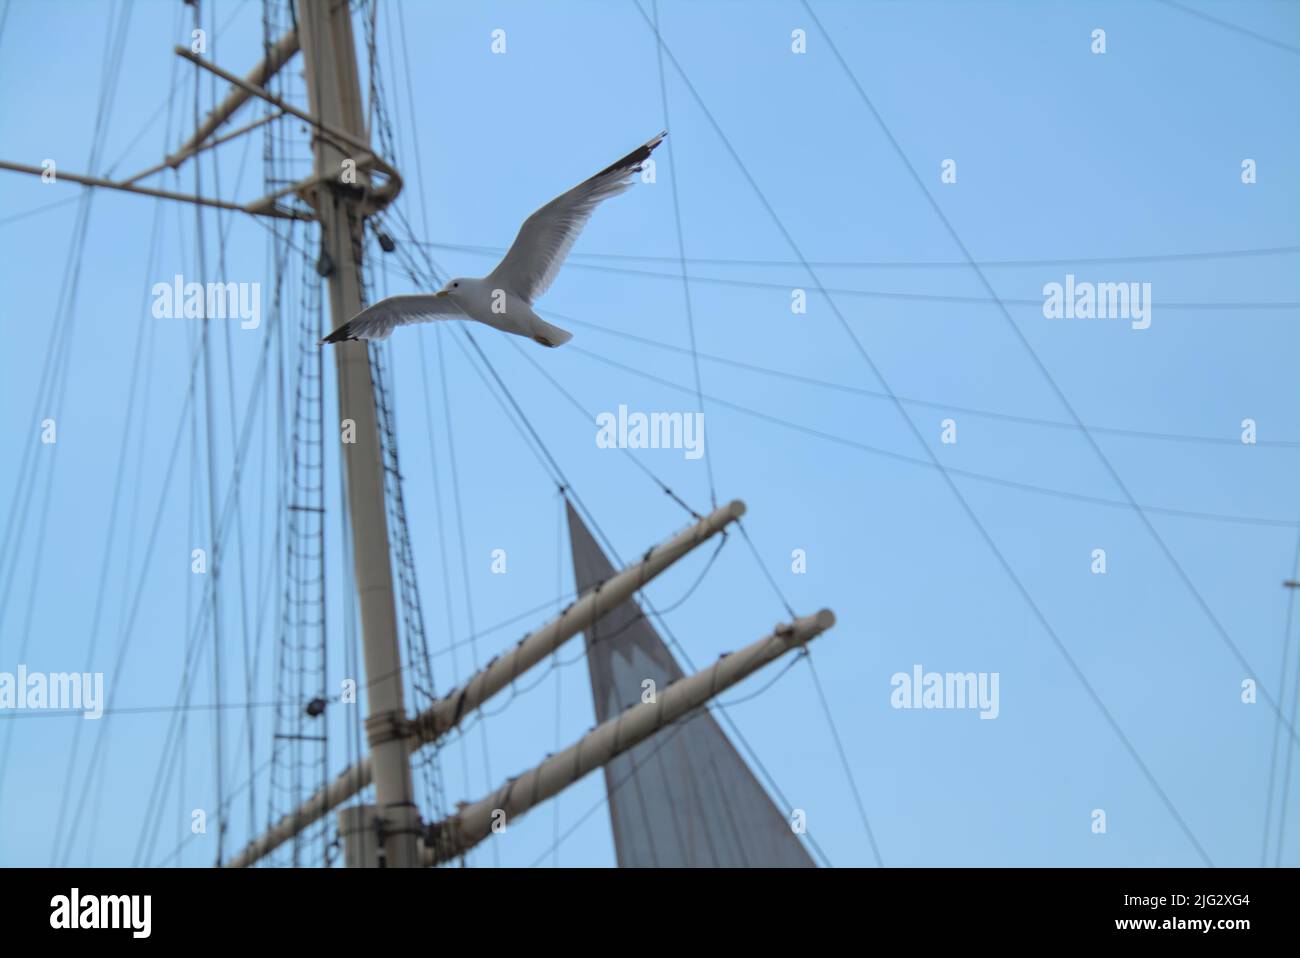 Sea gull flying in front of a ship's mast Stock Photo